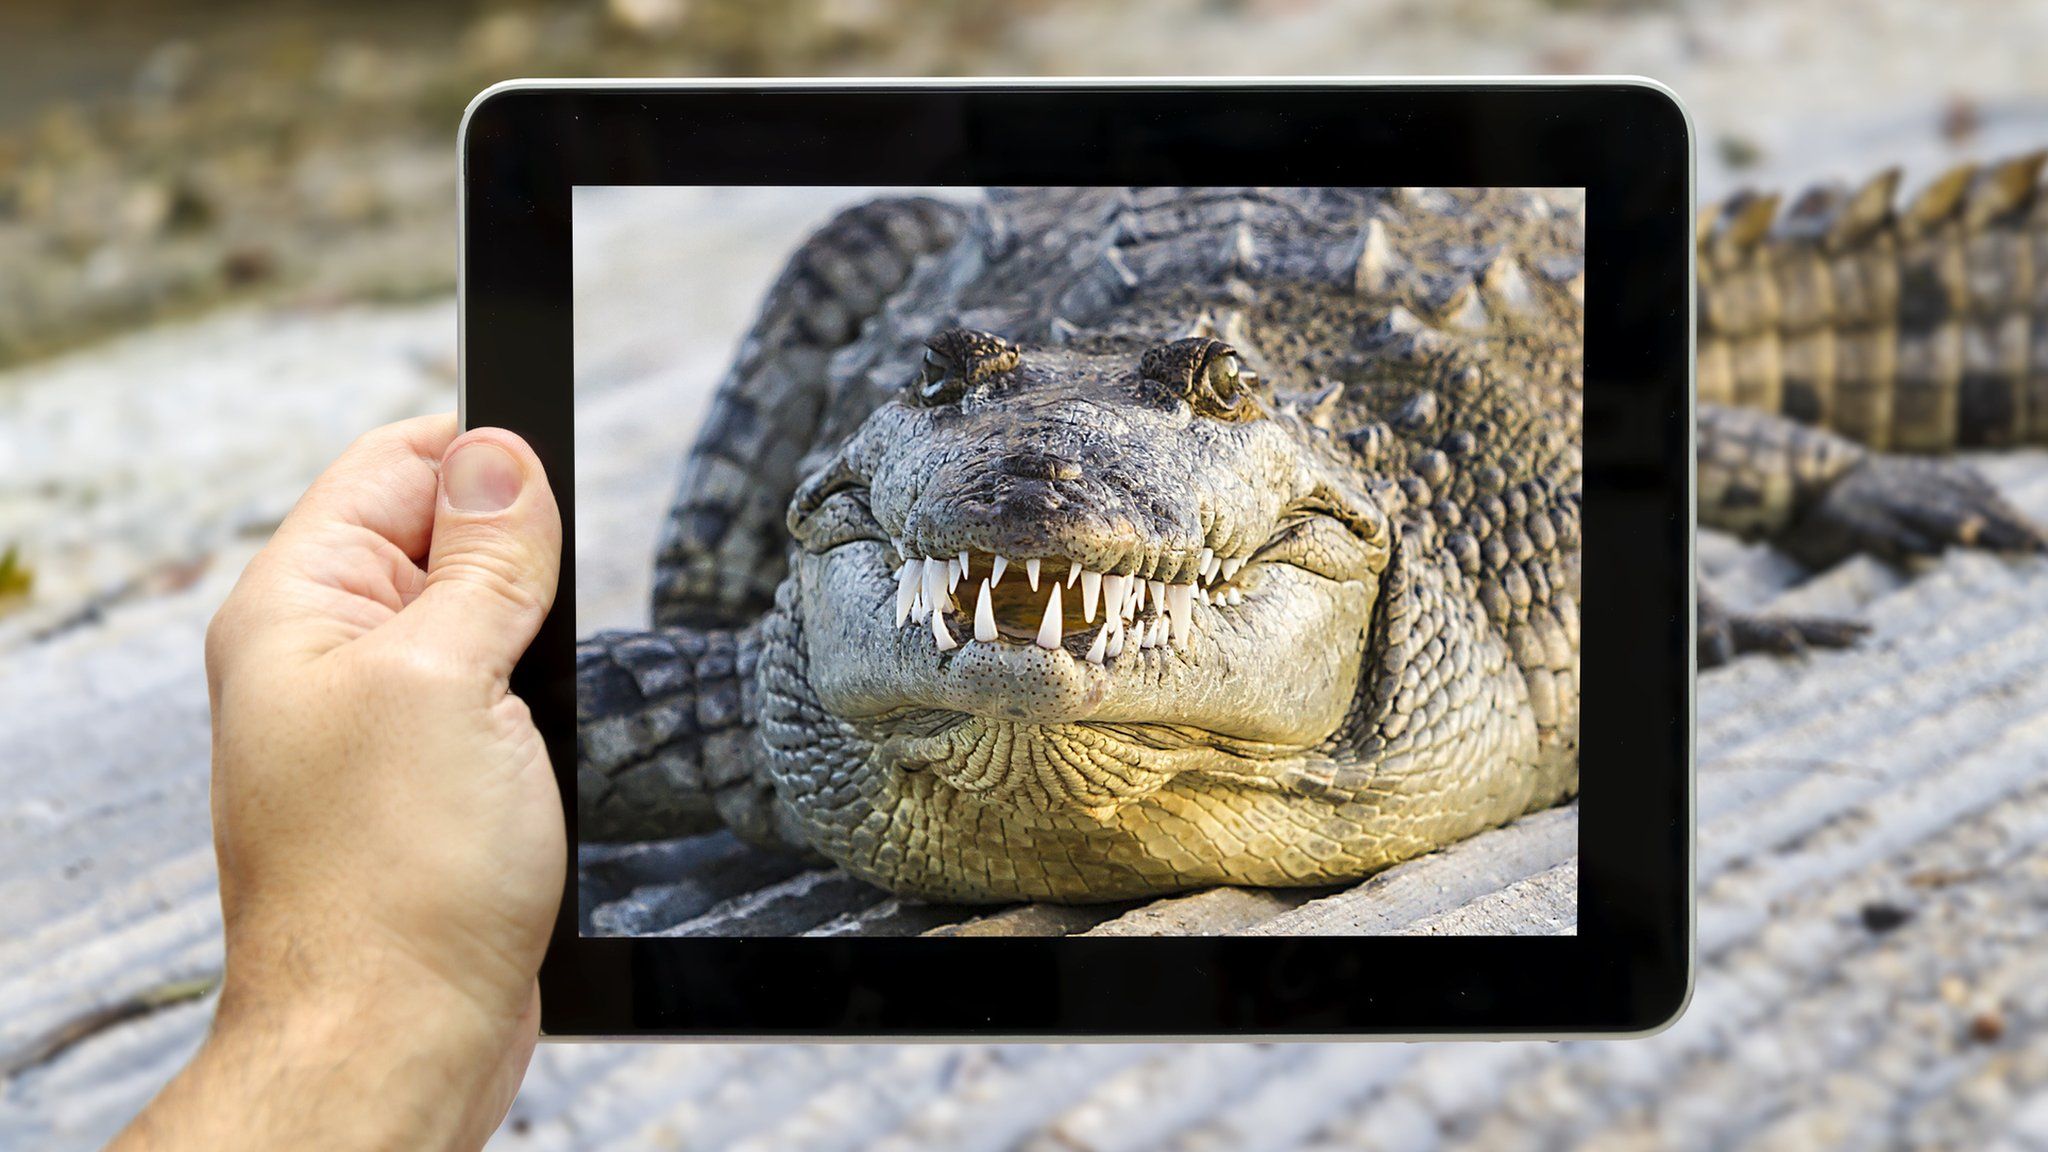 Ipad shown taking a picture of American alligator